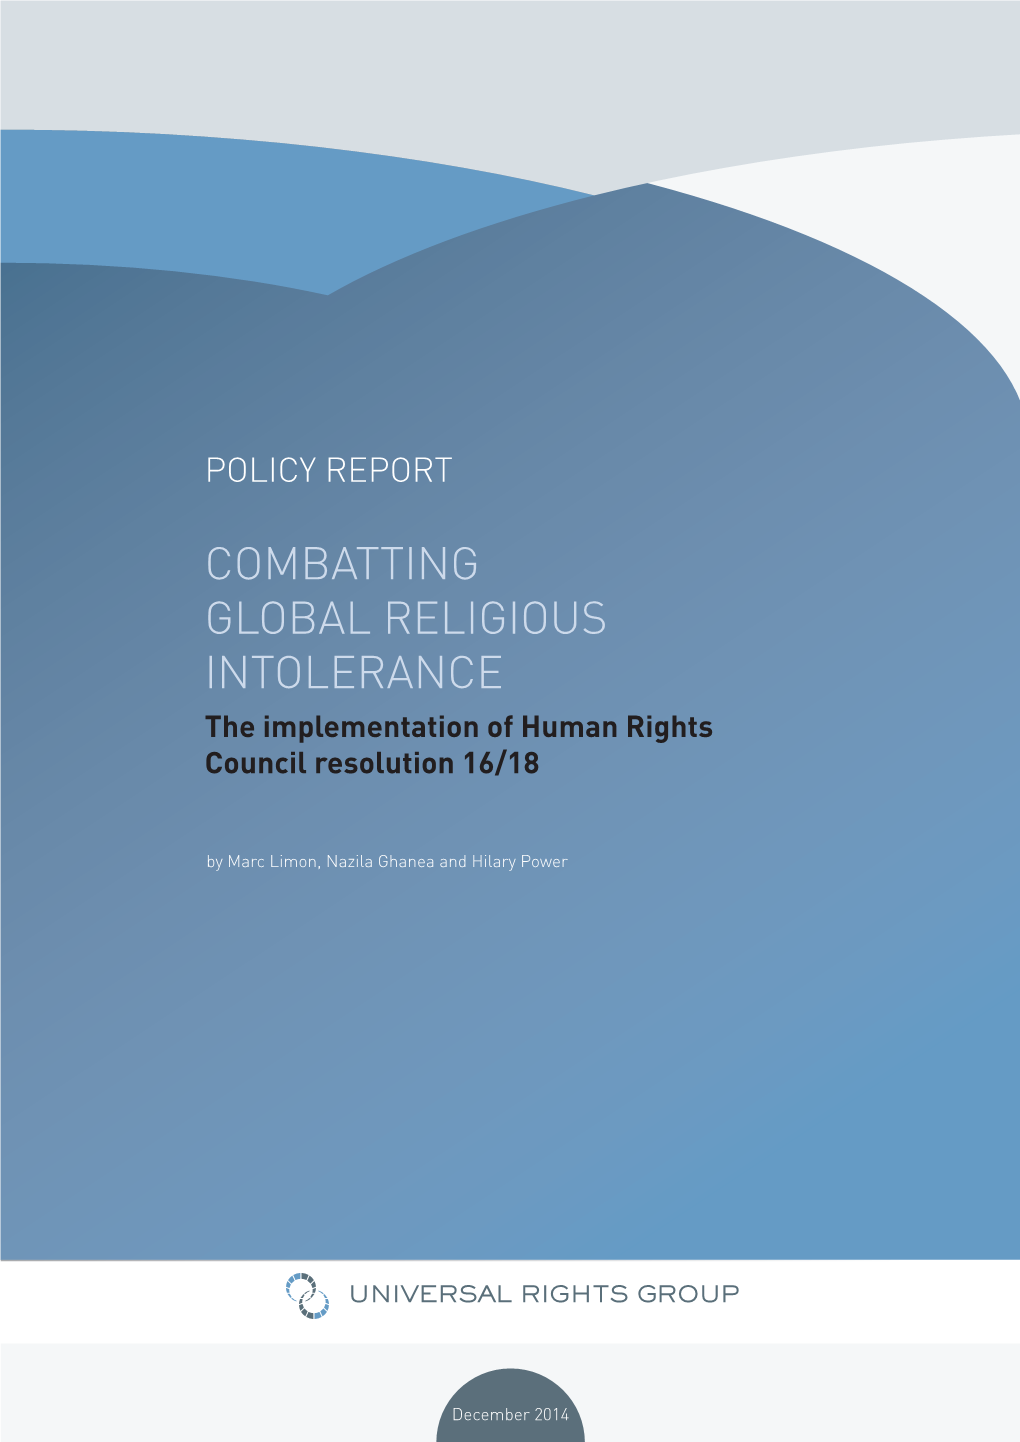 COMBATTING GLOBAL RELIGIOUS INTOLERANCE the Implementation of Human Rights Council Resolution 16/18